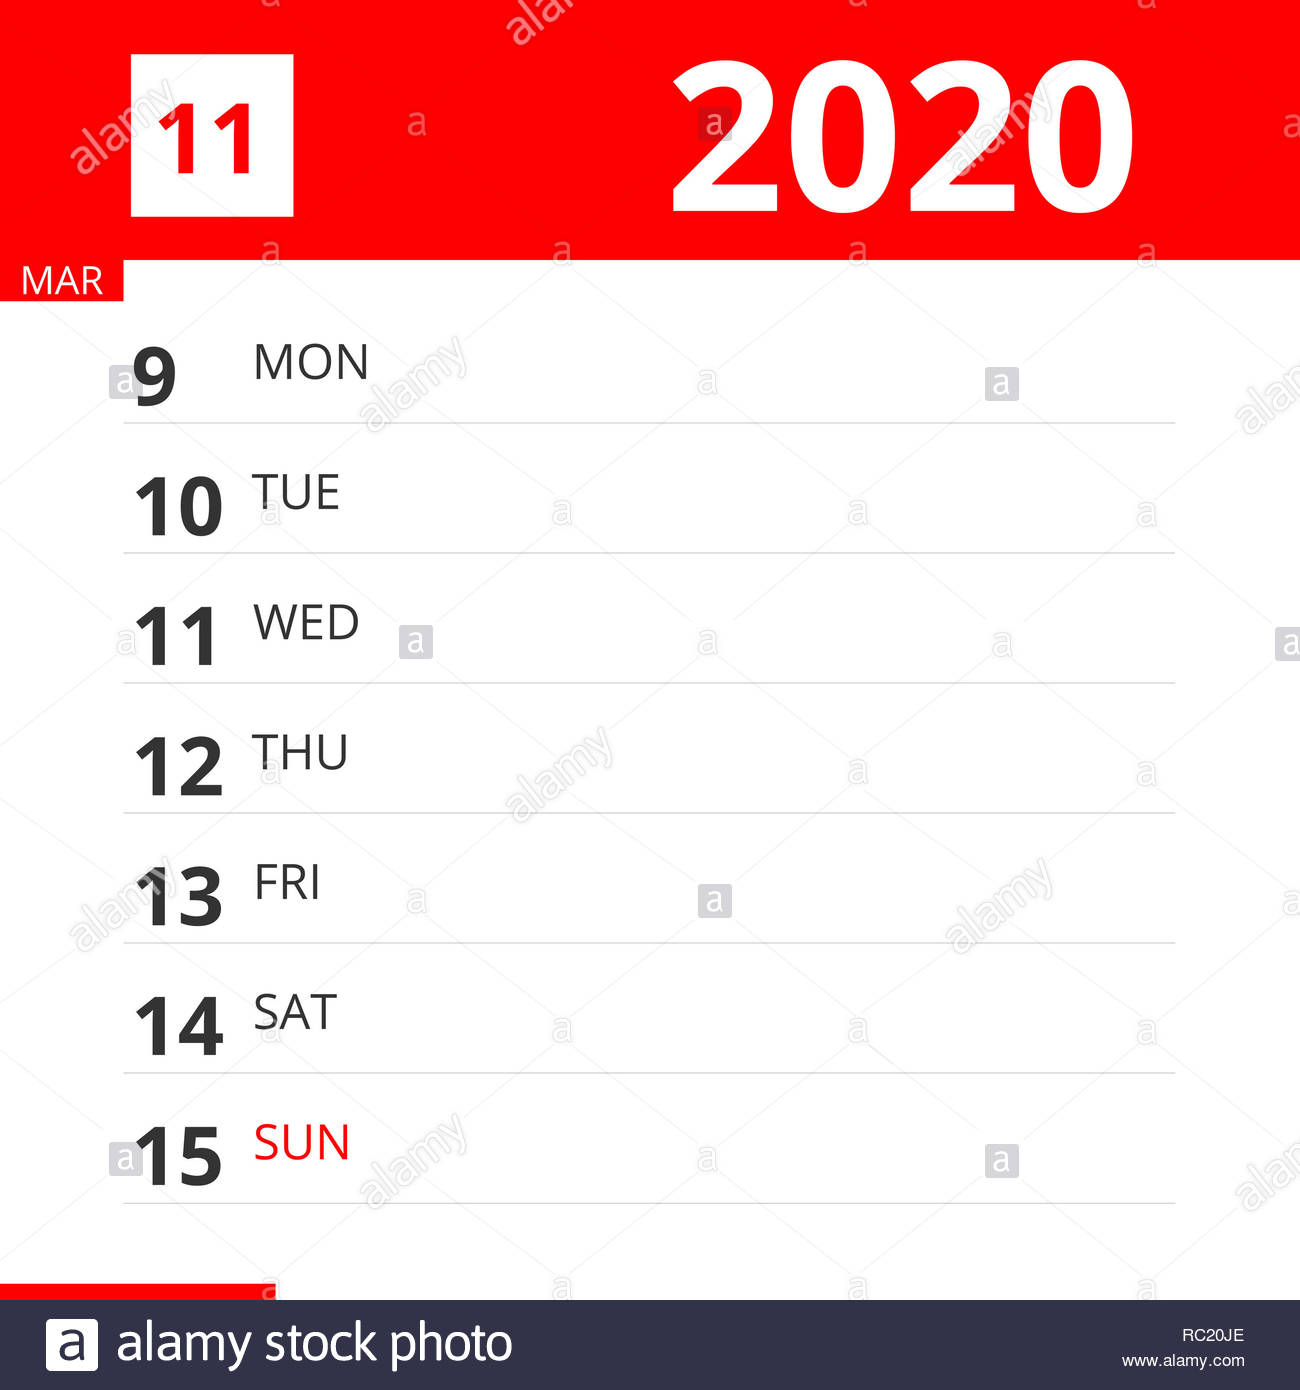 Calendar Planner For Week 11 In 2020, Ends March 15, 2020